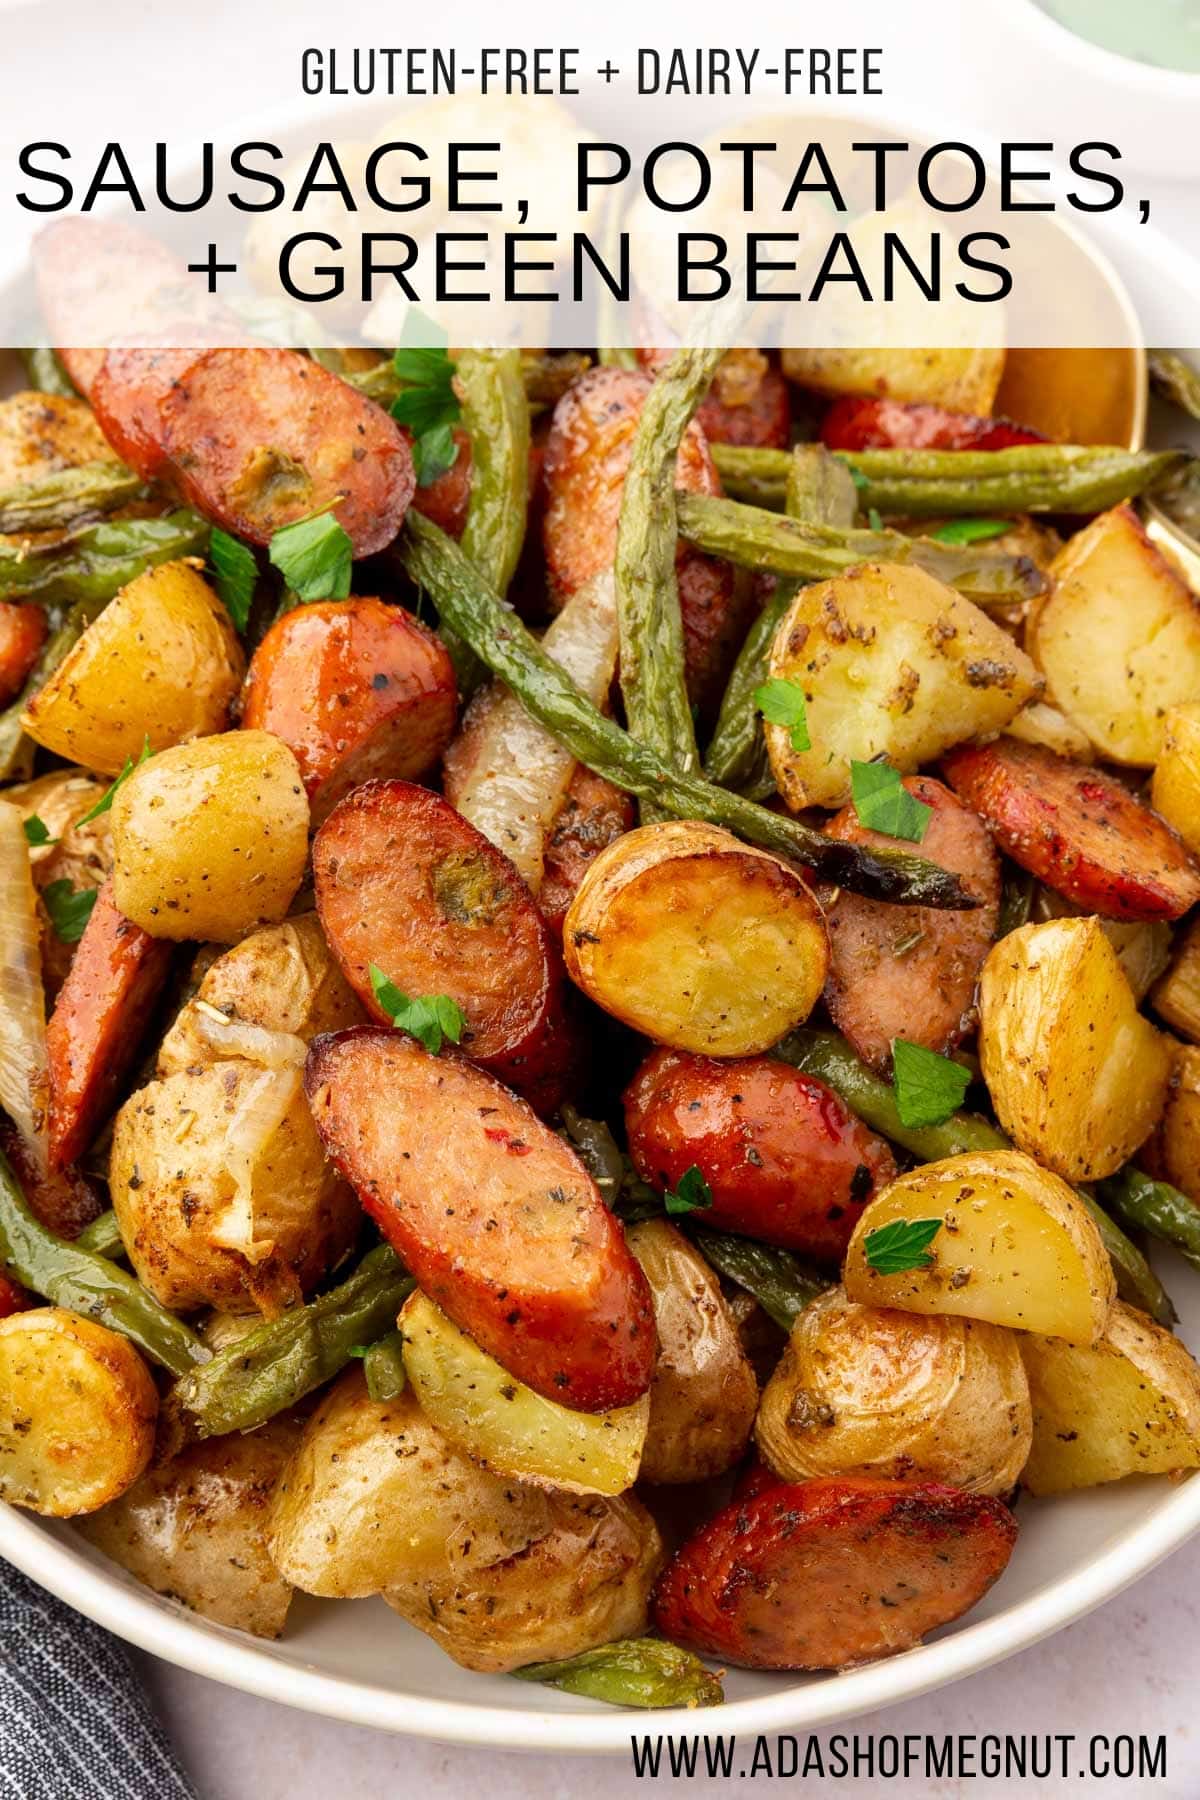 A serving bowl of roasted potatoes, green beans, and sausage topped with parsley.